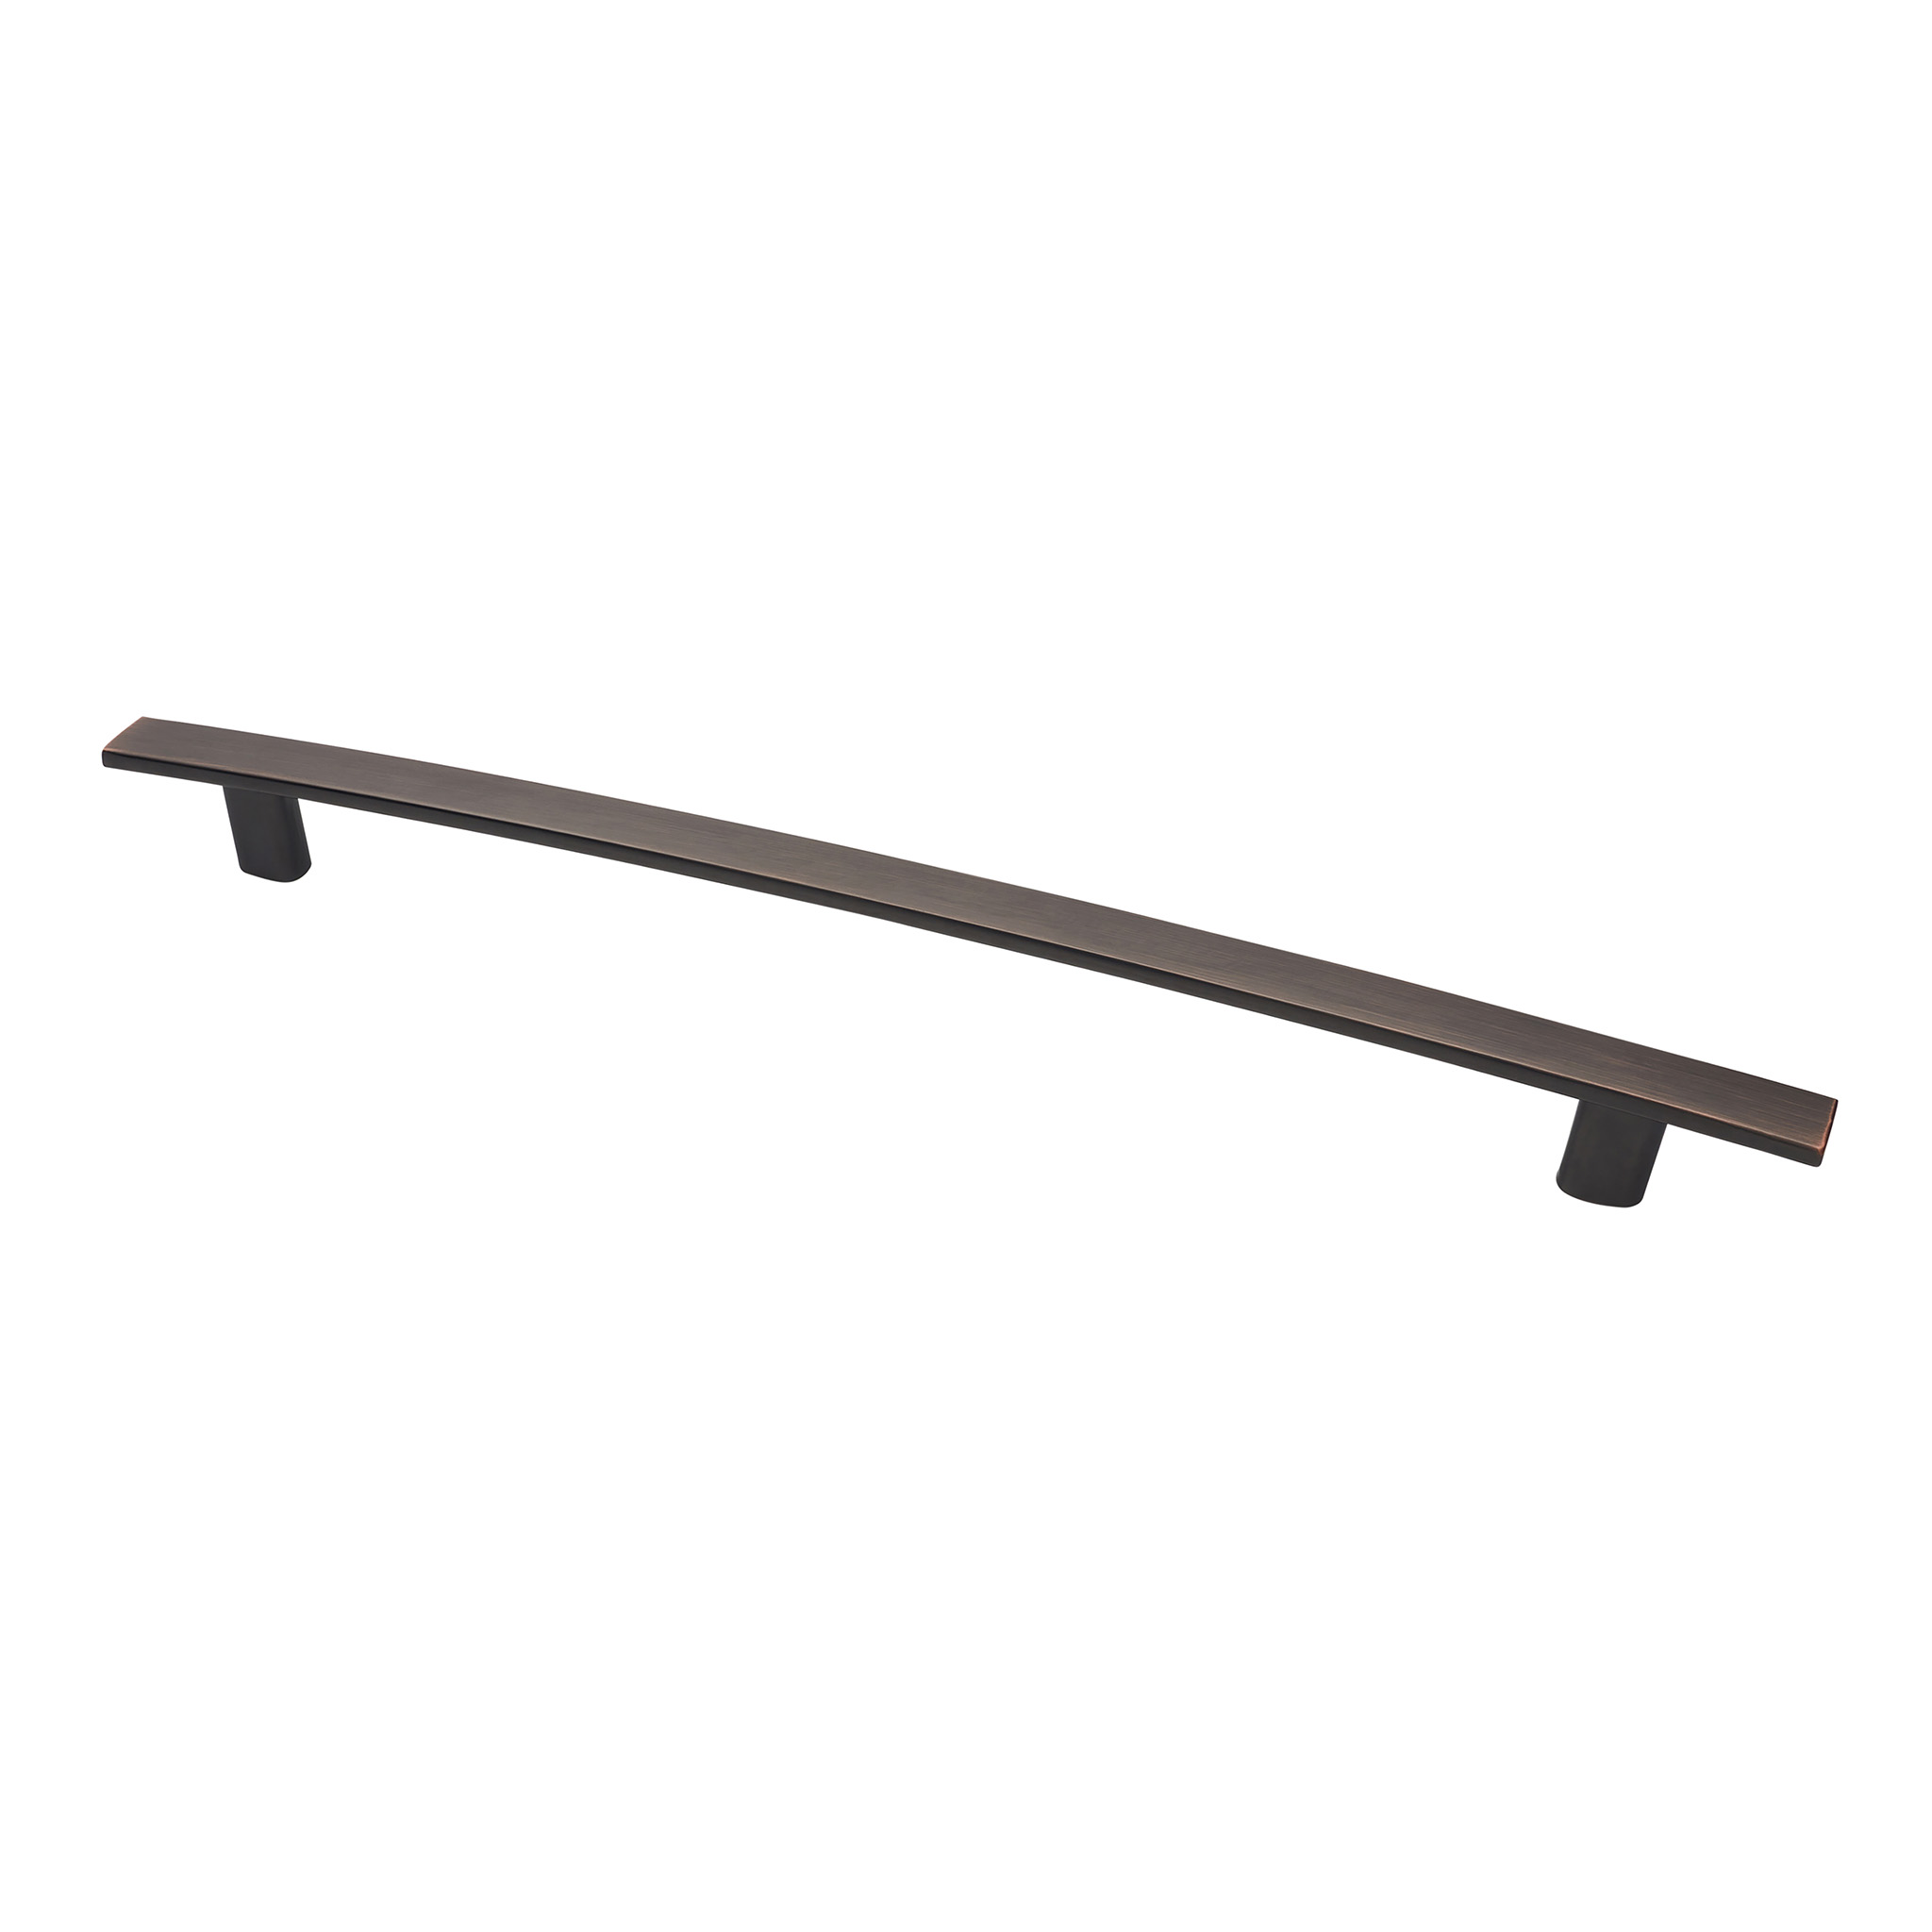 Kemsley Classic Pull, 256mm, Antique Copper Bronze Highlight